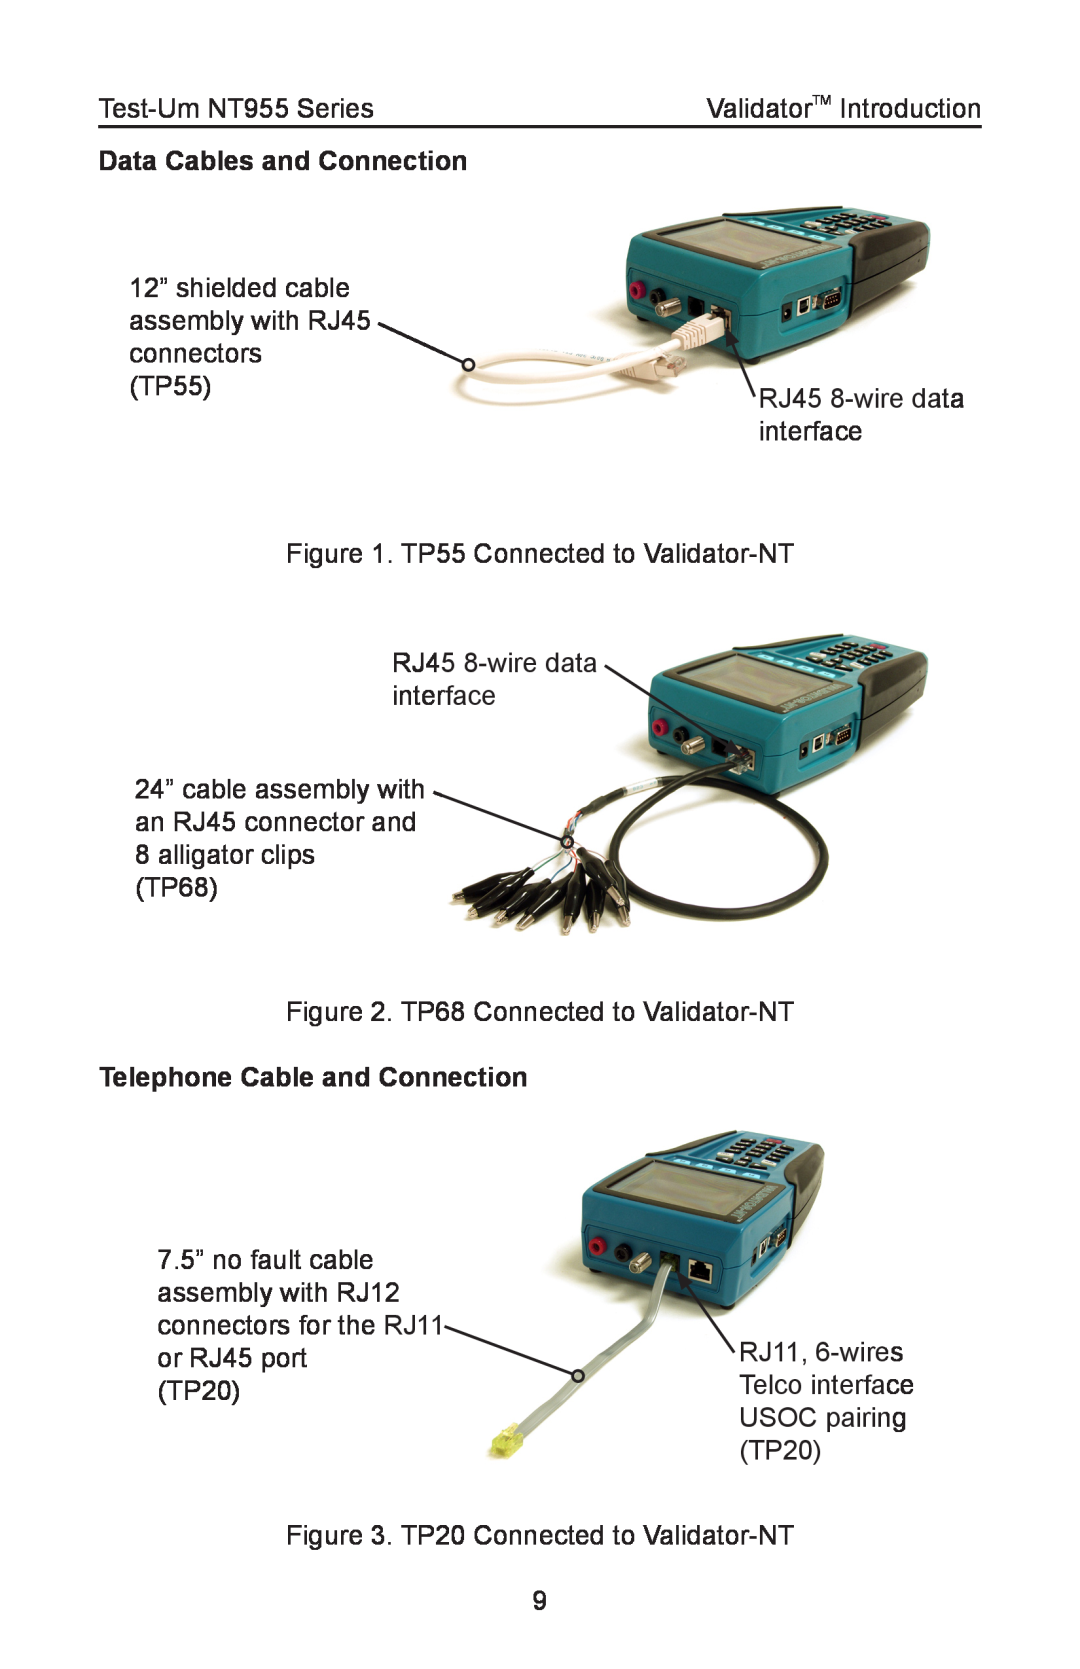 Test-Um NT955 operating instructions Data Cables and Connection, Telephone Cable and Connection 